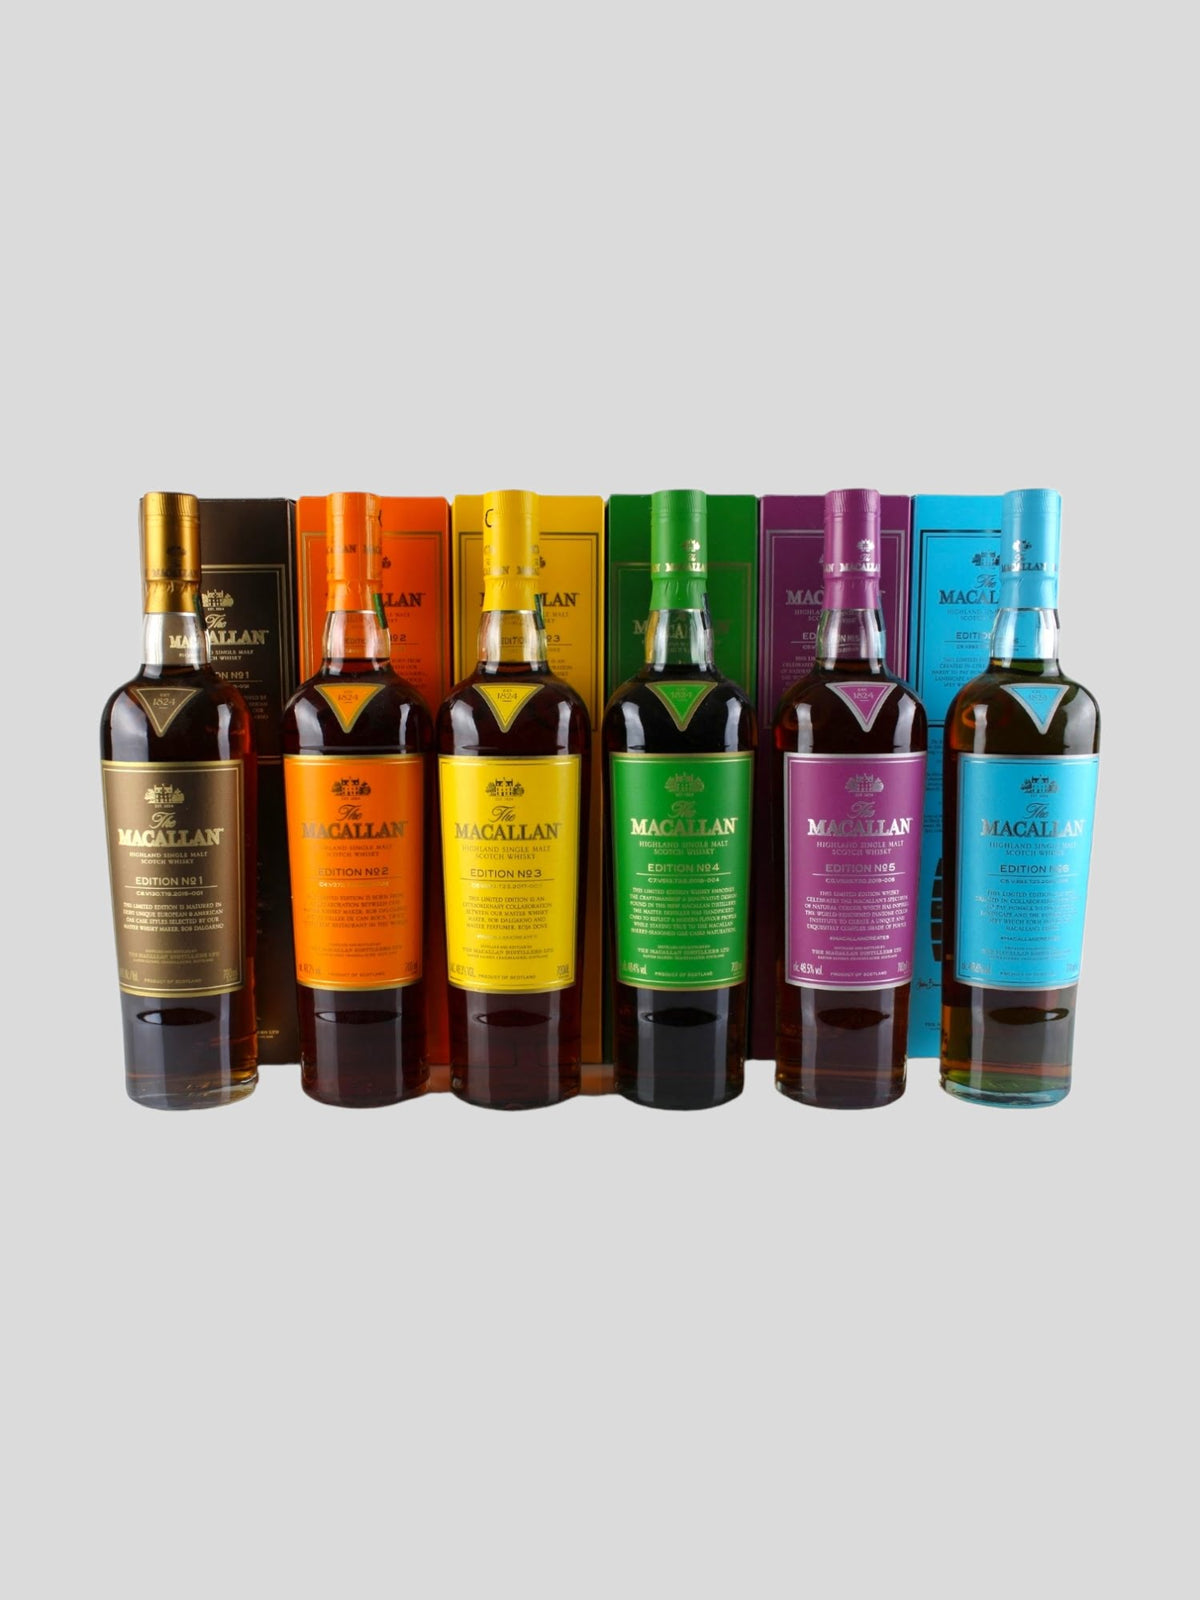 Macallan Full set of Edition ( No 1 to No 6) 6 bottles of whisky